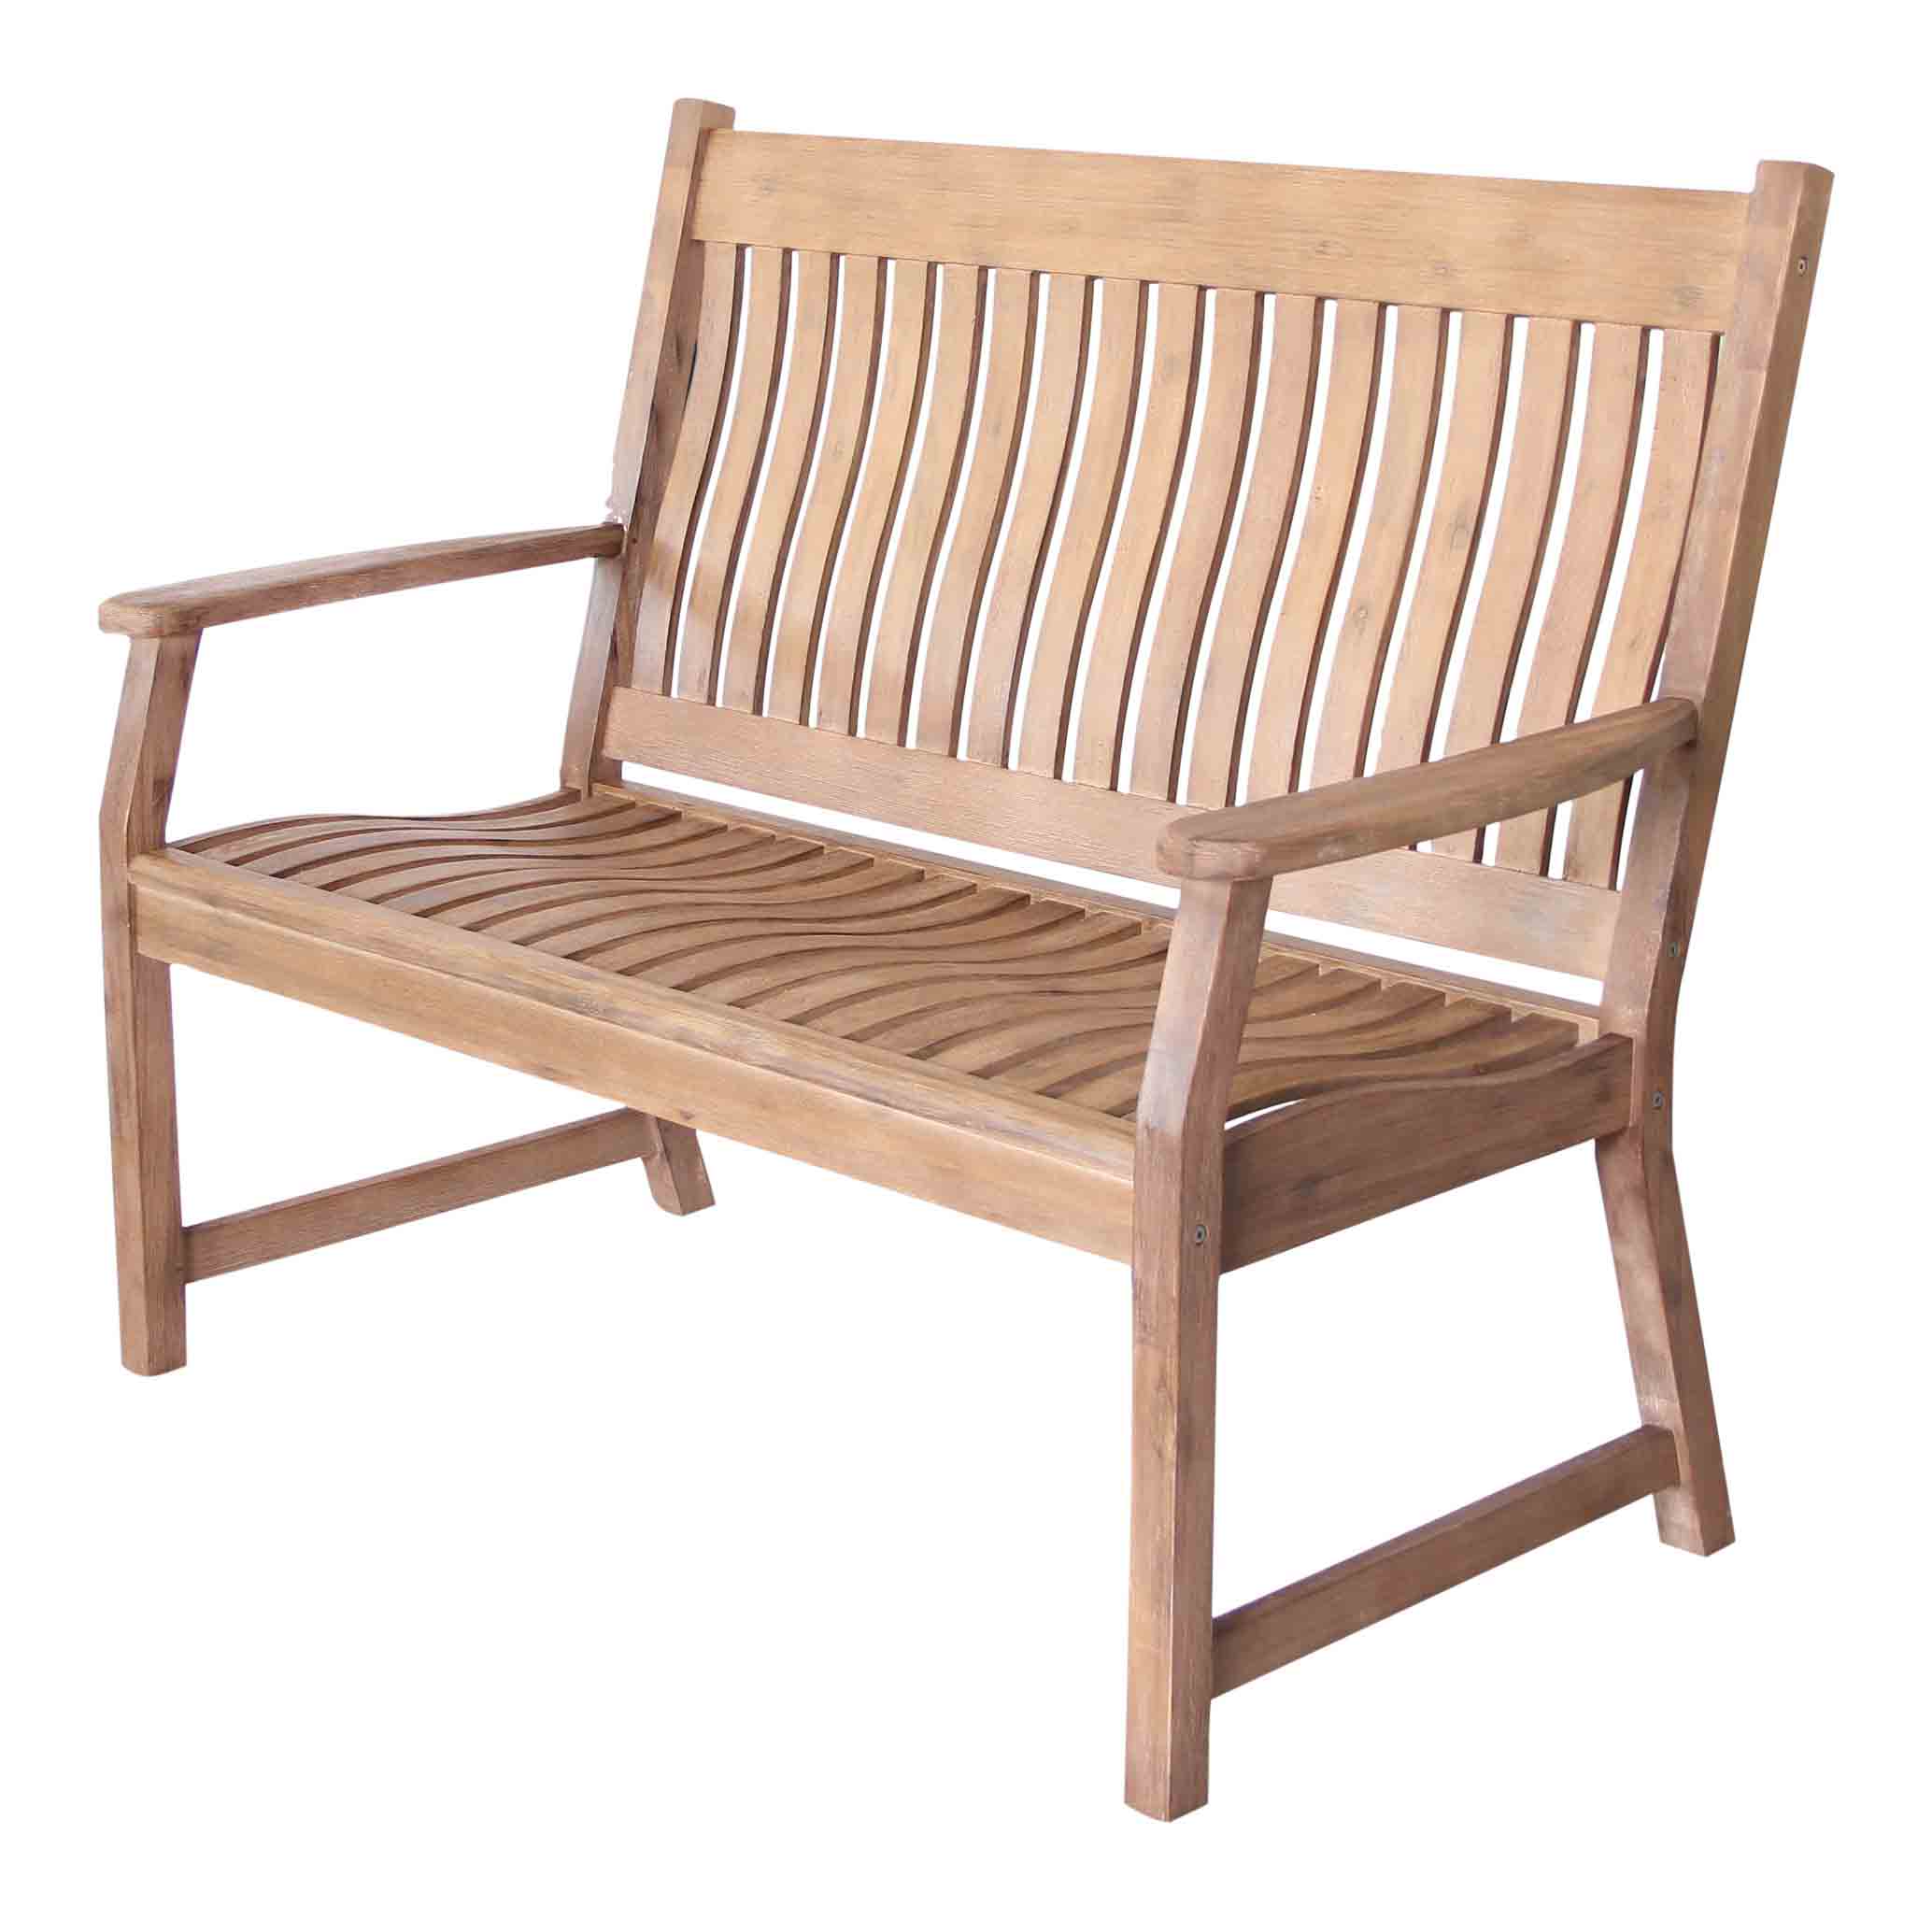 LG Outdoor Hanoi 2 Seat Curved Back Bench Natural